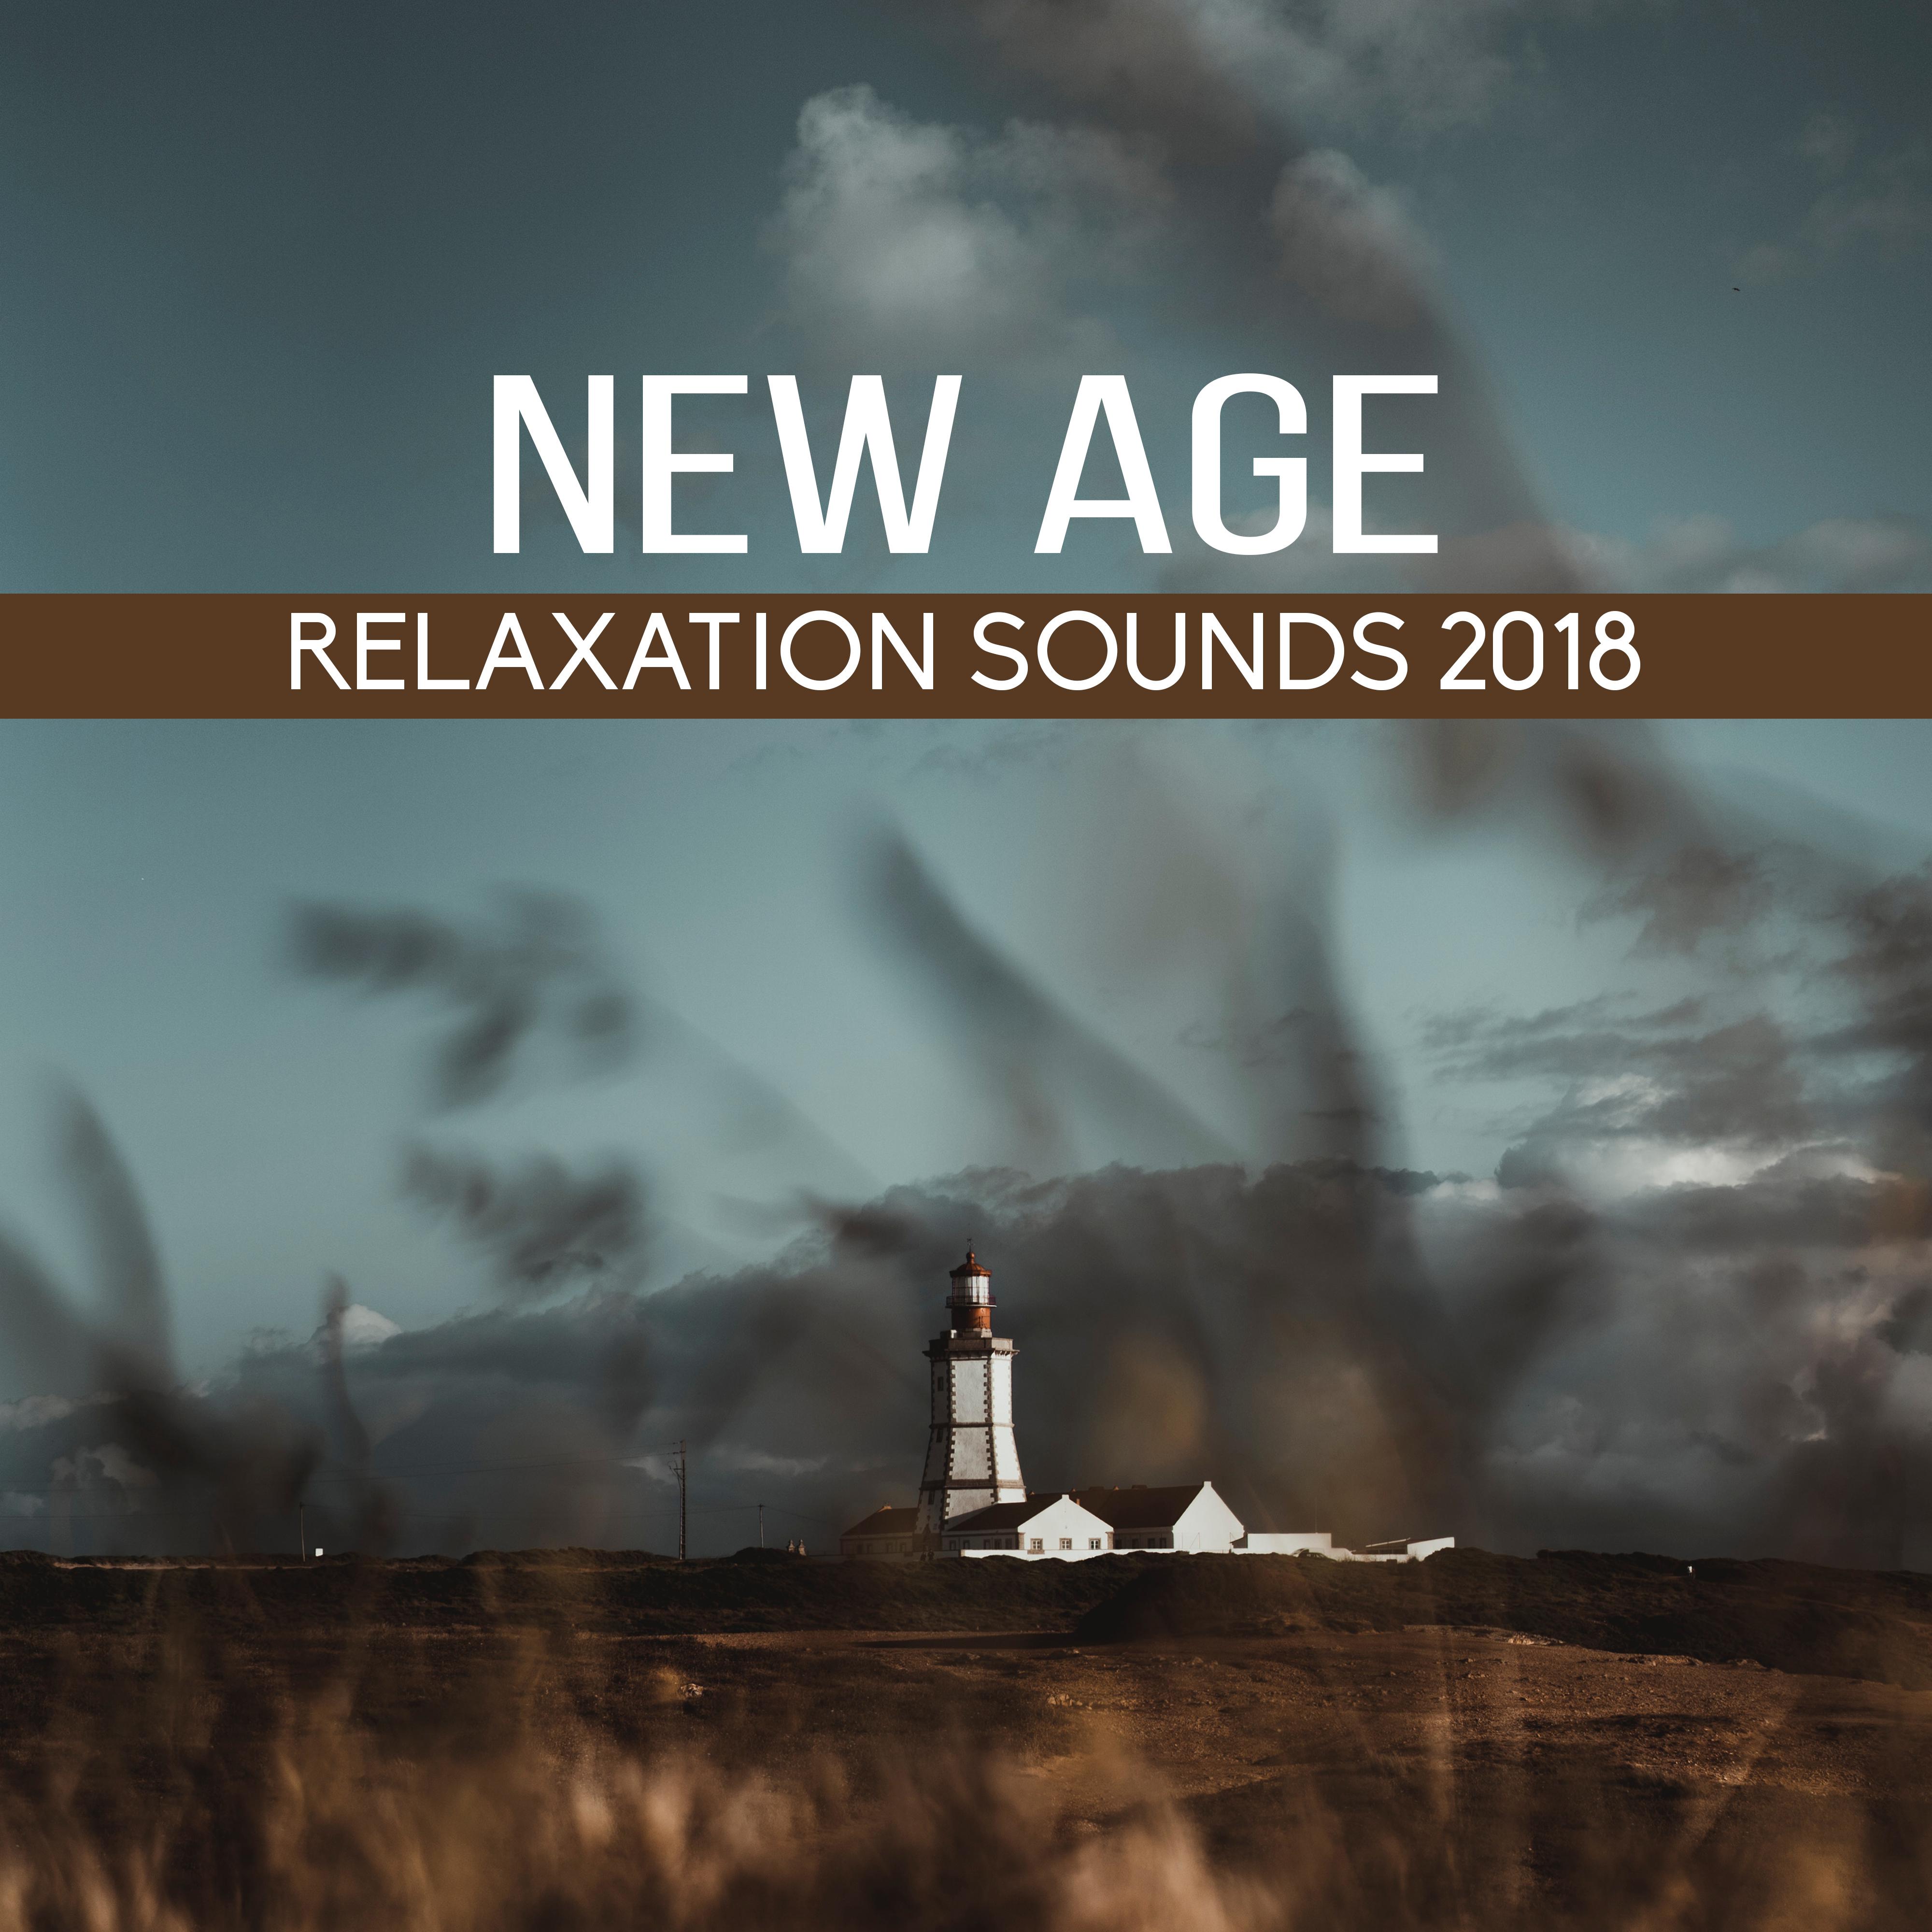 New Age Relaxation Sounds 2018